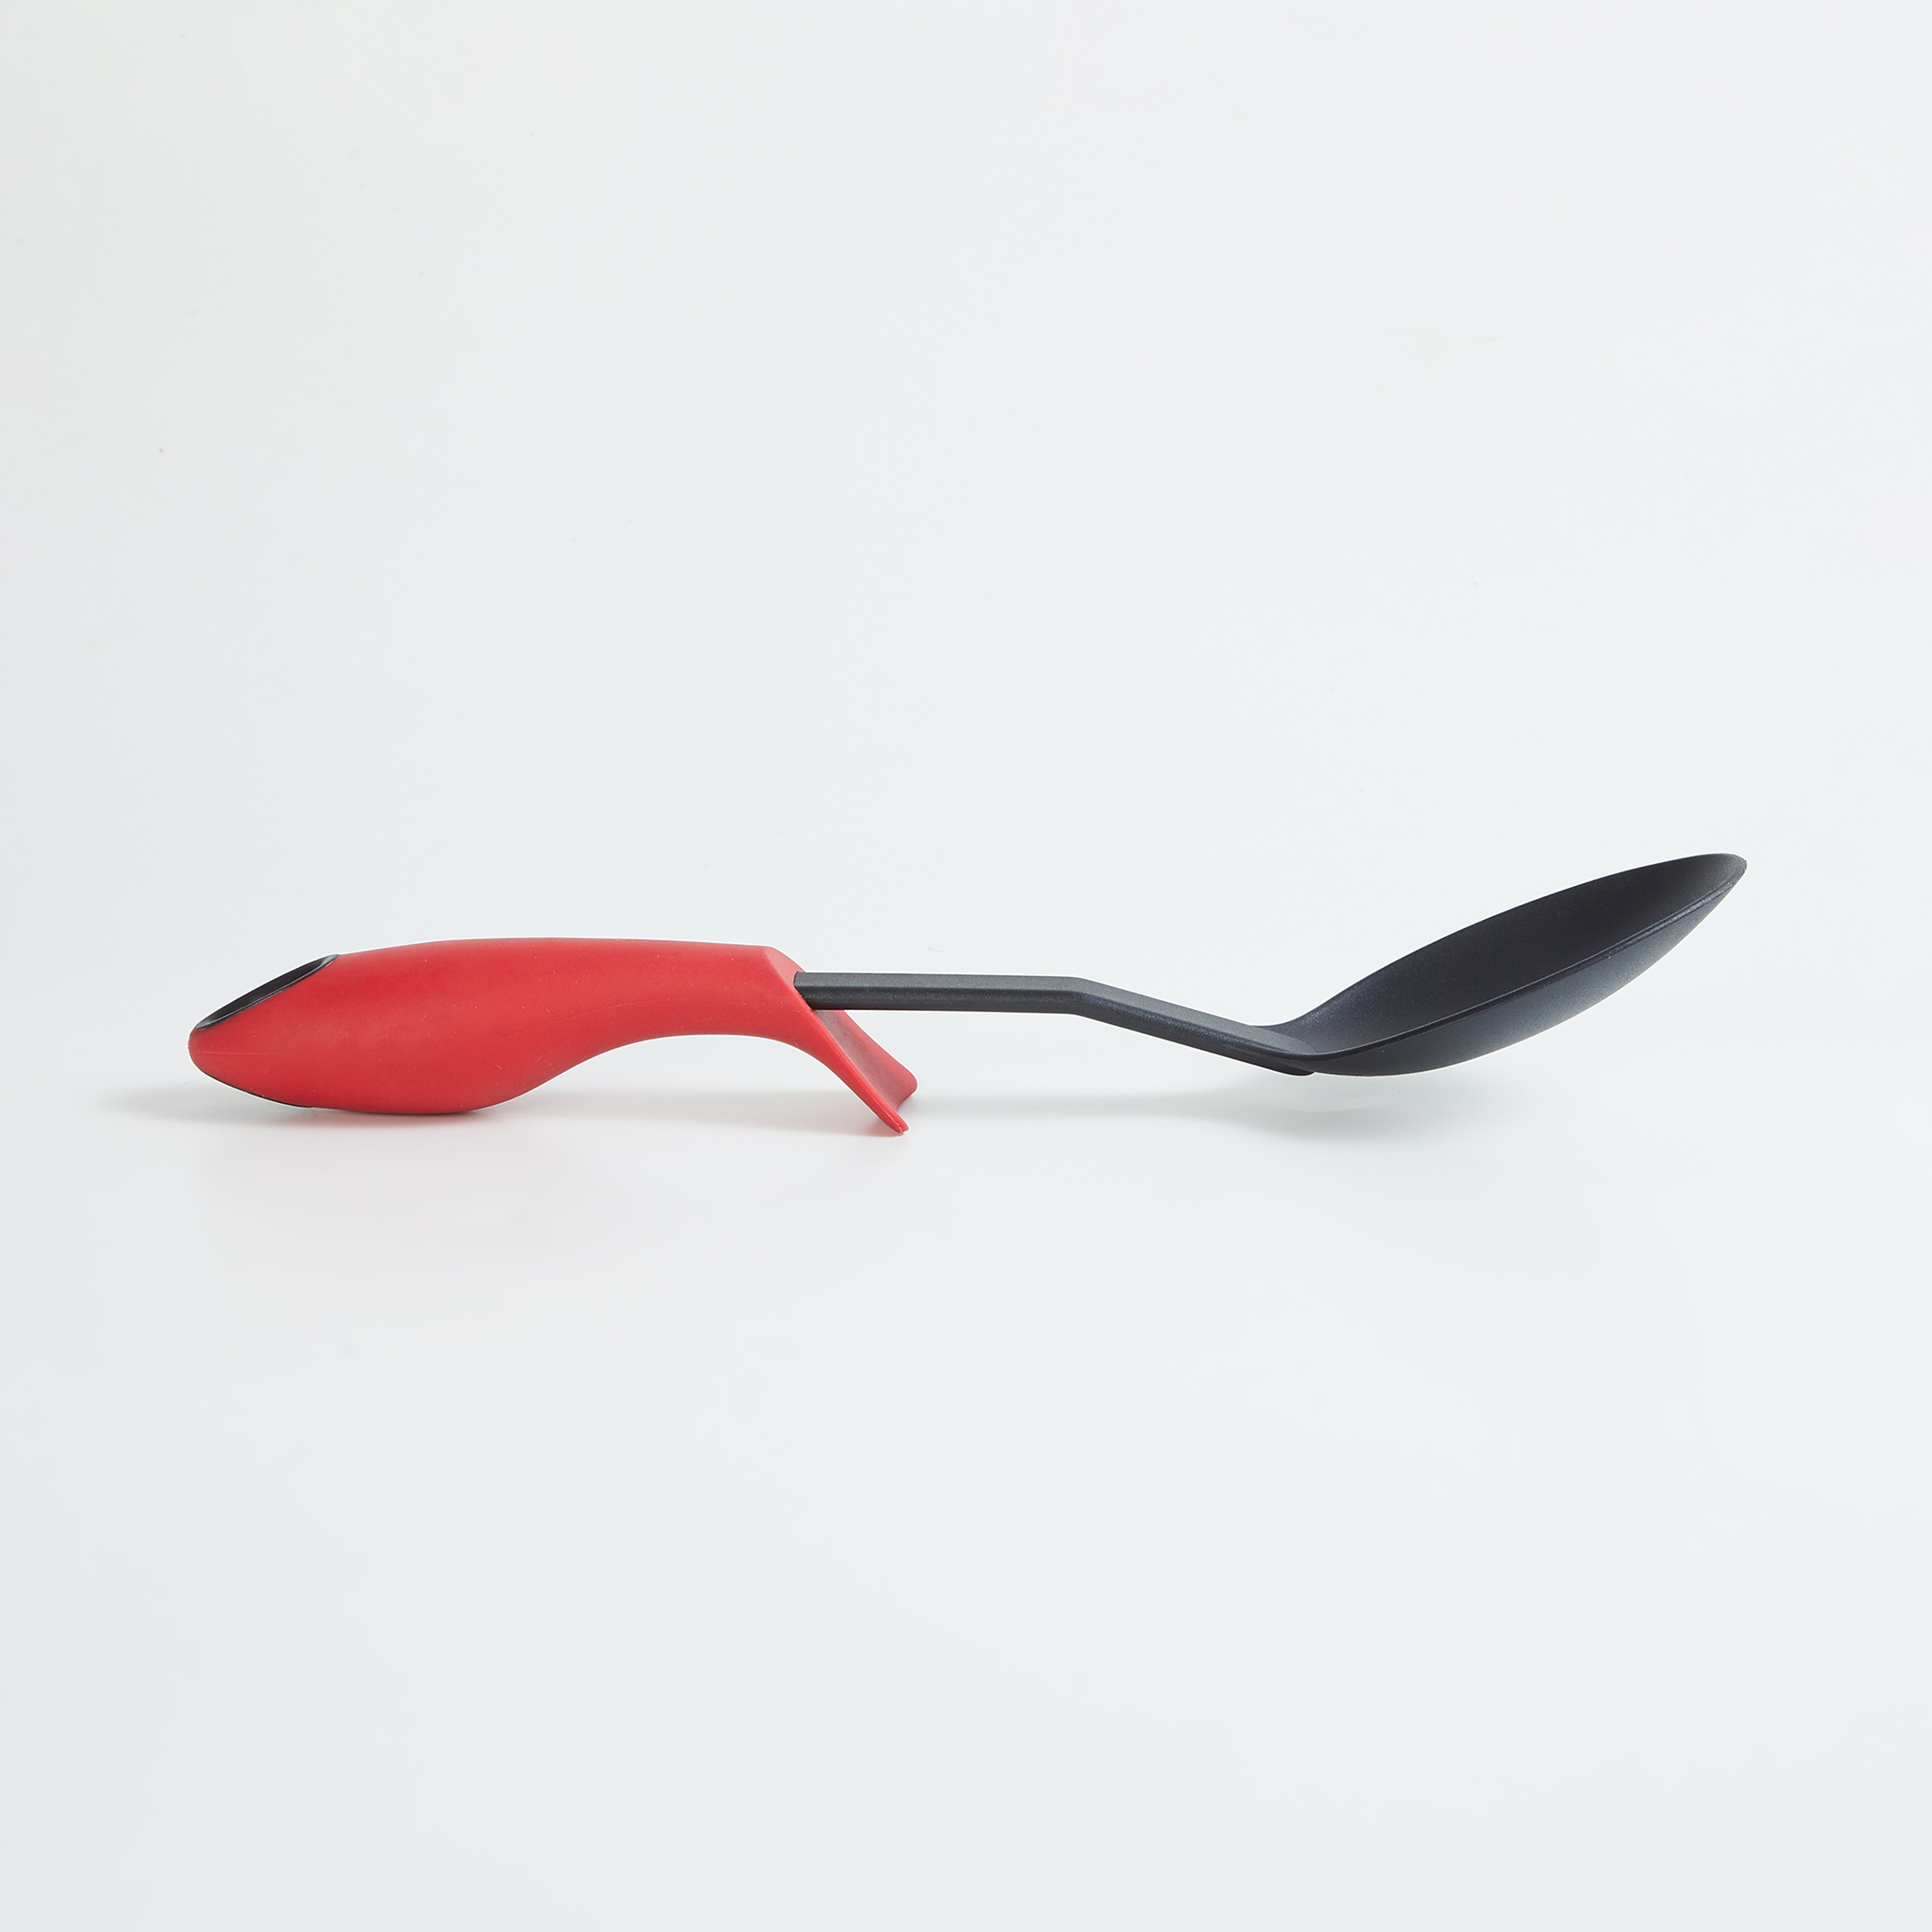 Truffles Nylon Spoon with In-Built Spoon Rest